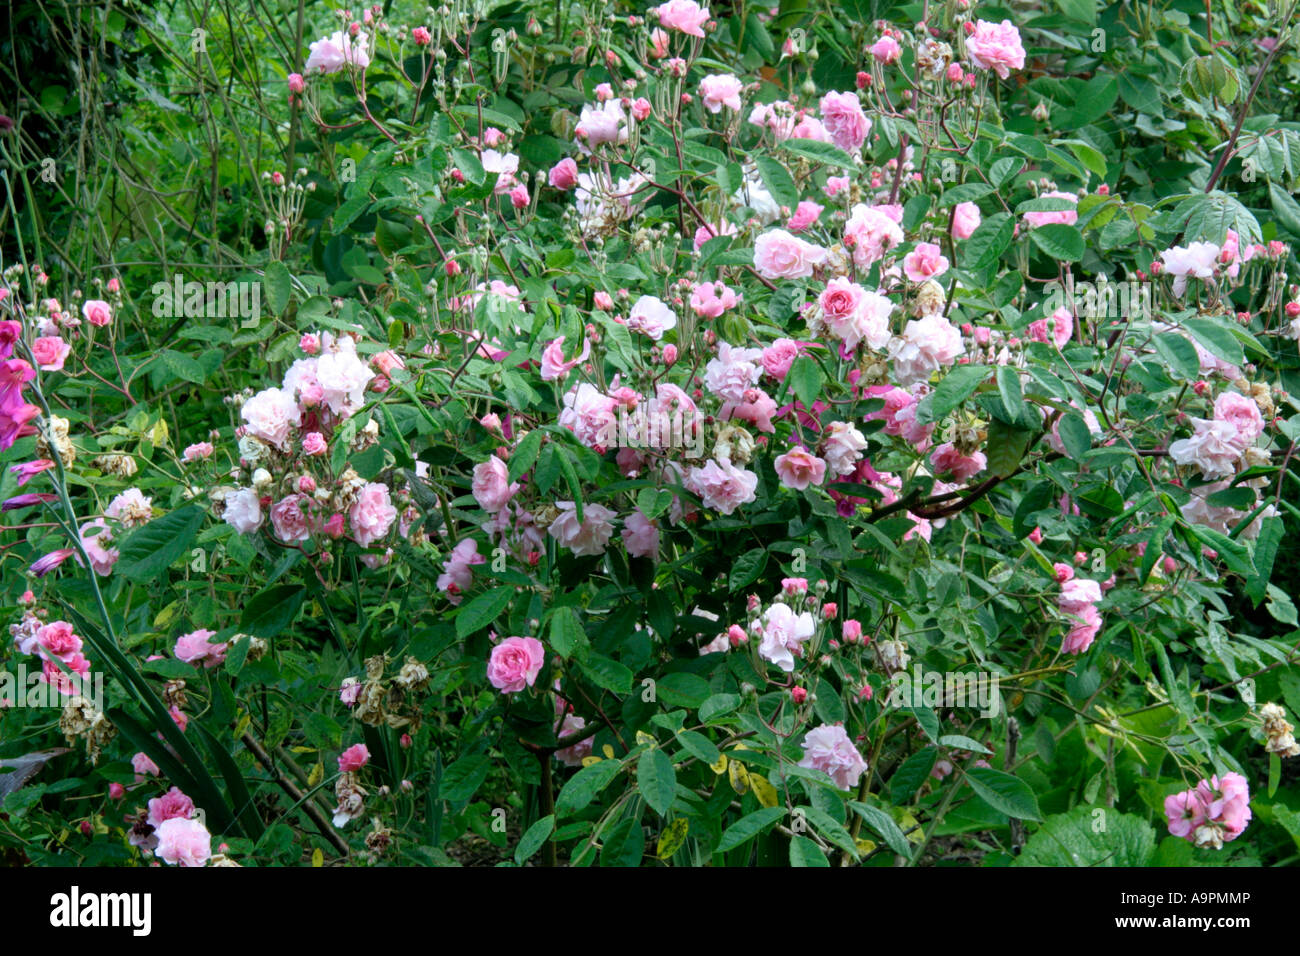 Hybrid musk shrub rose Cornelia is disease resistant and flowers over a long period Stock Photo